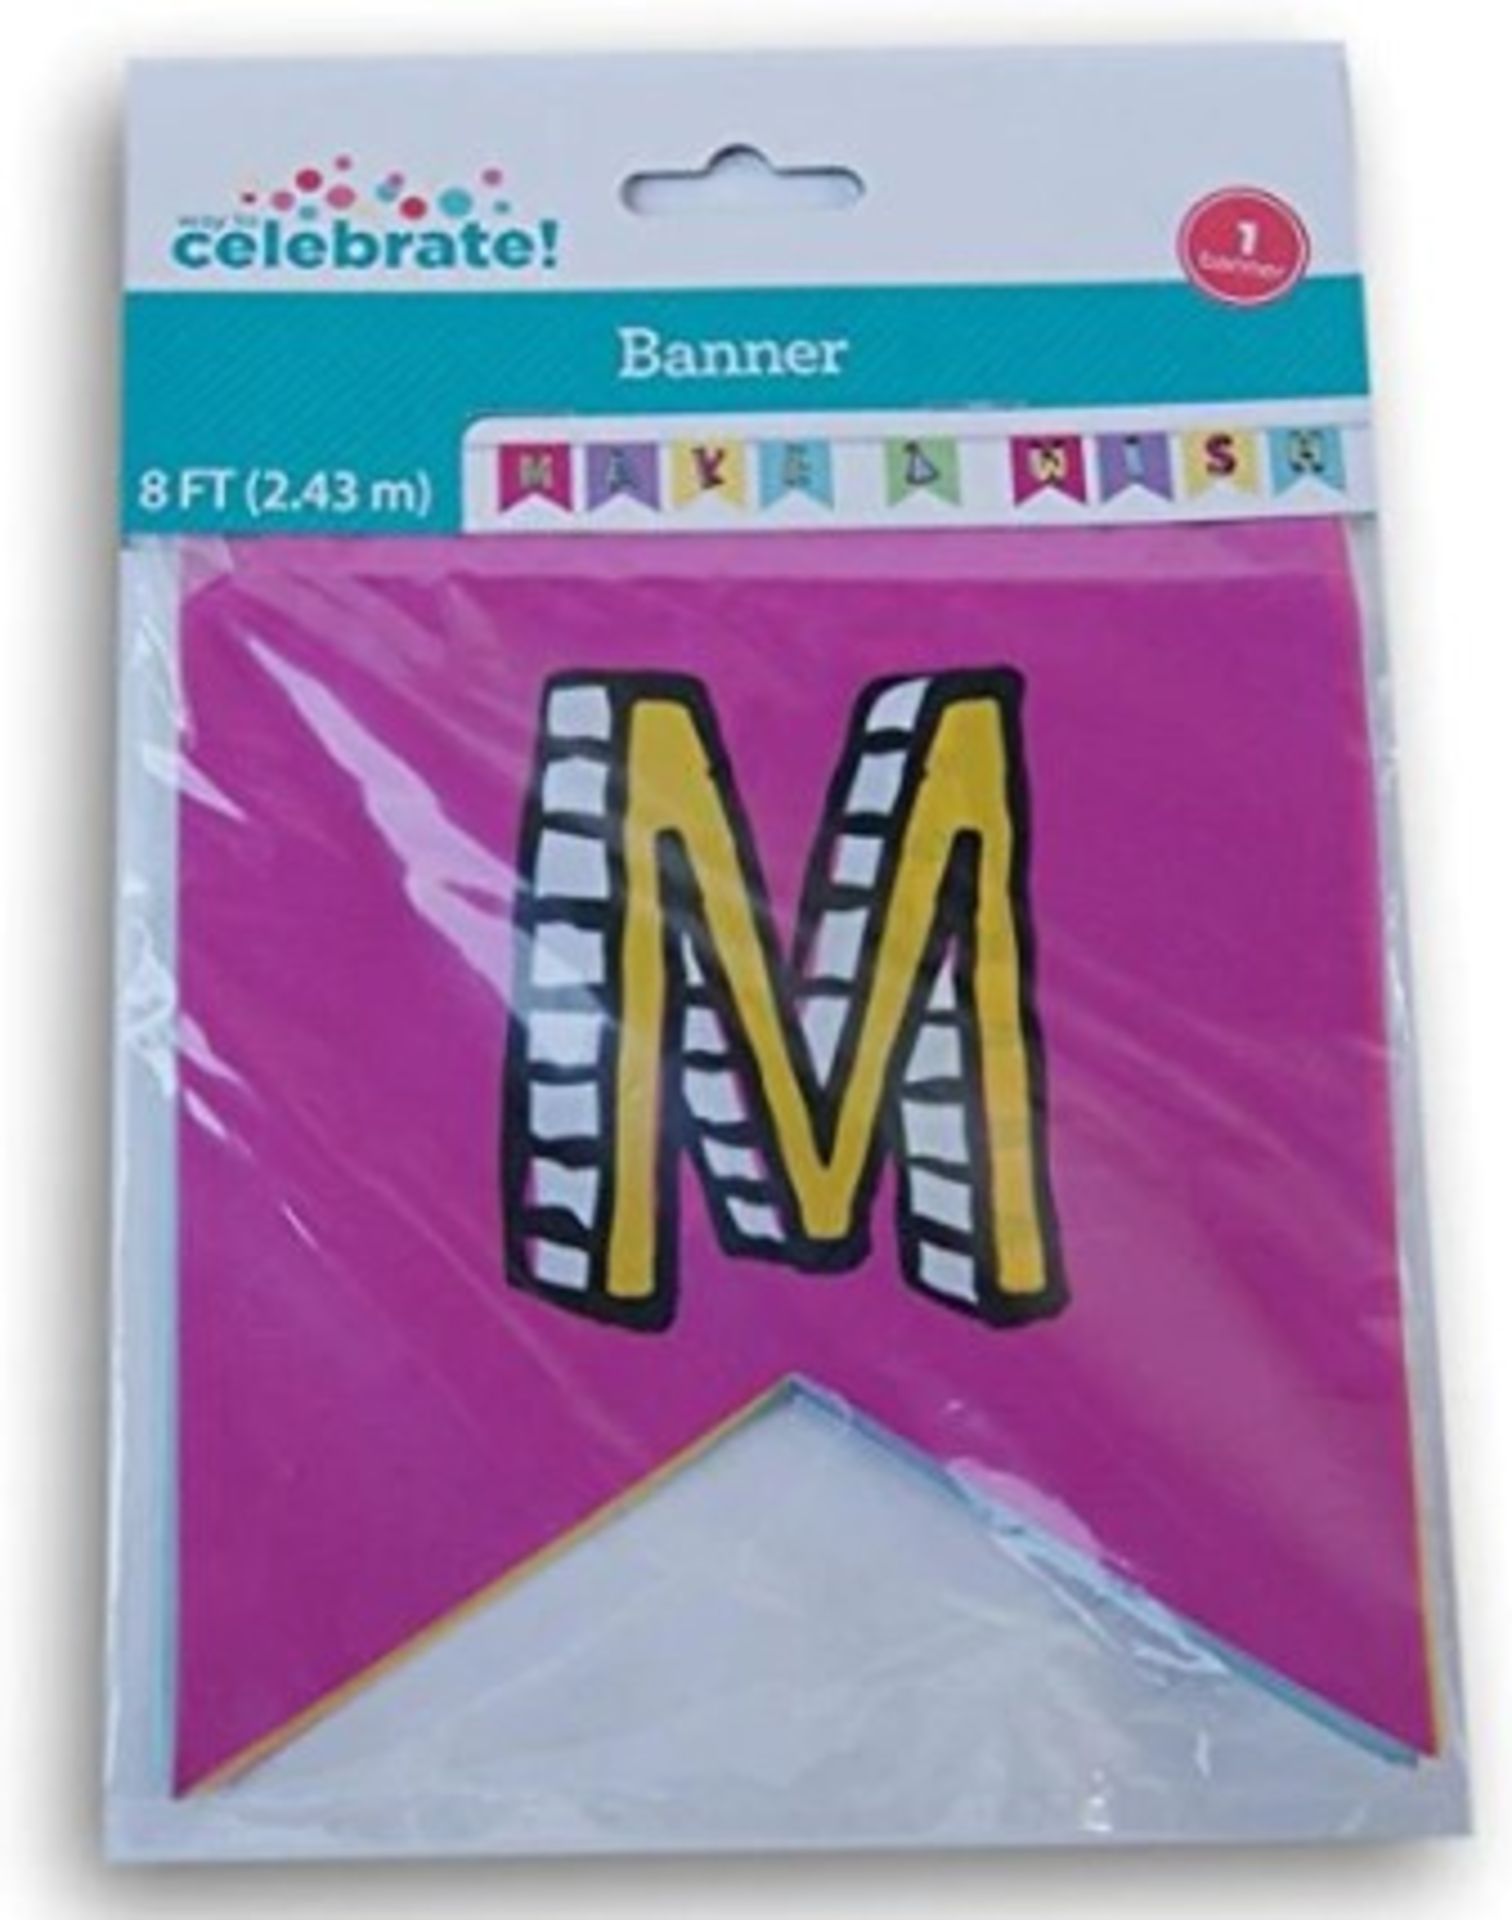 1000 COLOURFUL BIRTHDAY BANNERS FOR PARTIES - RANGE OF DESIGNS, RRP £10,000 - Image 5 of 5